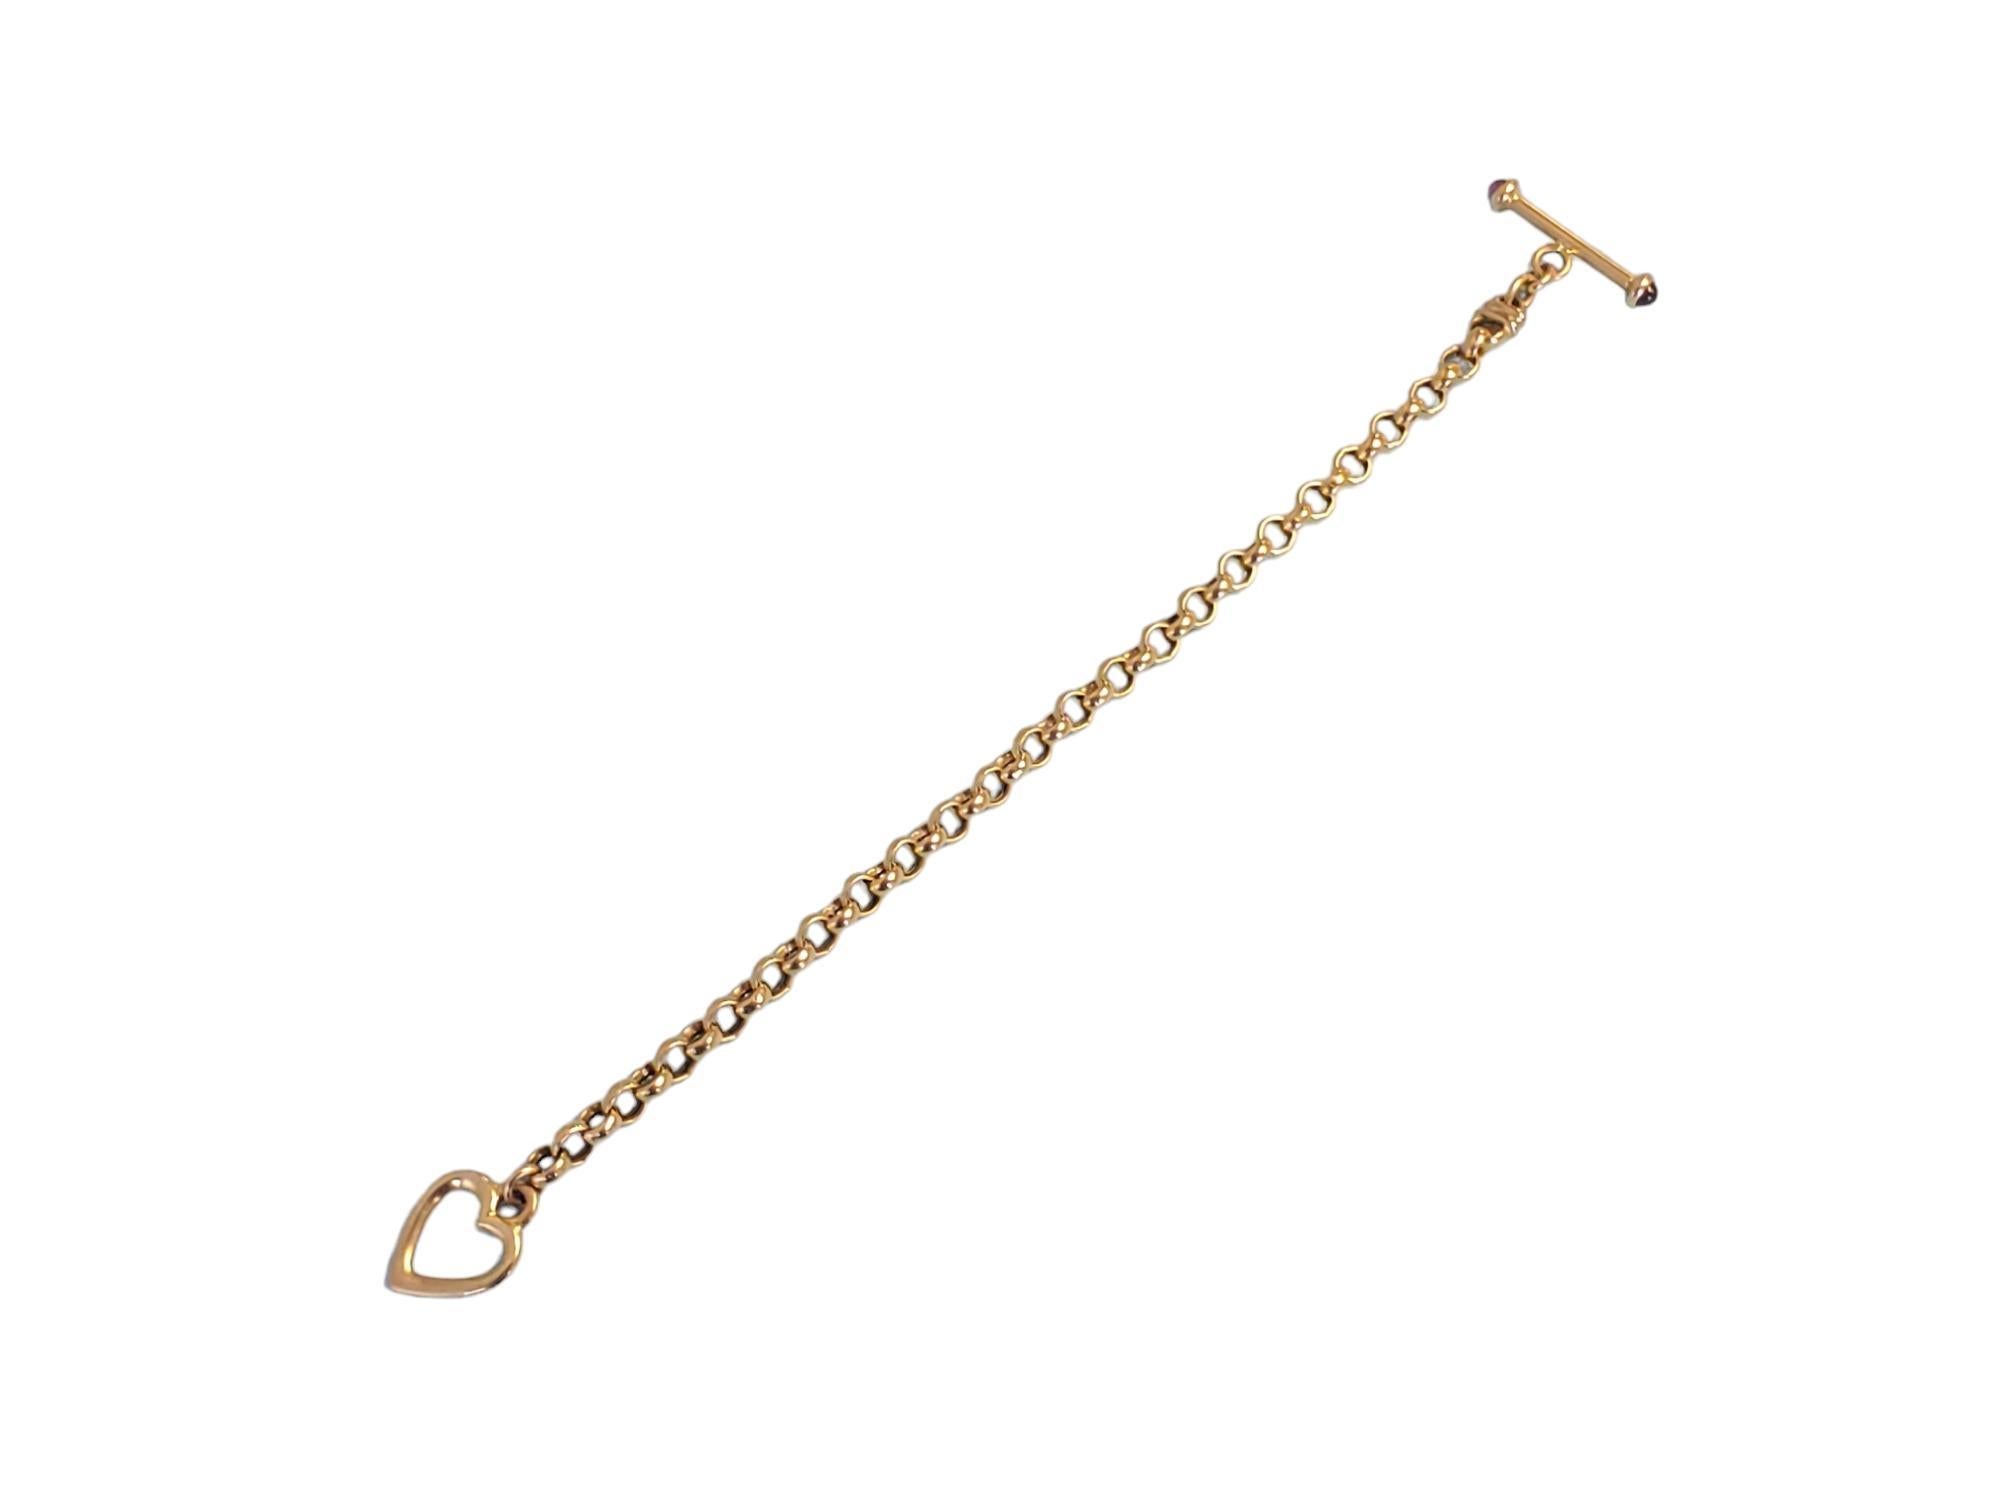 Modern Estate 14k Toggle Bracelet Yellow Gold Link Chain with Heart Lock For Sale